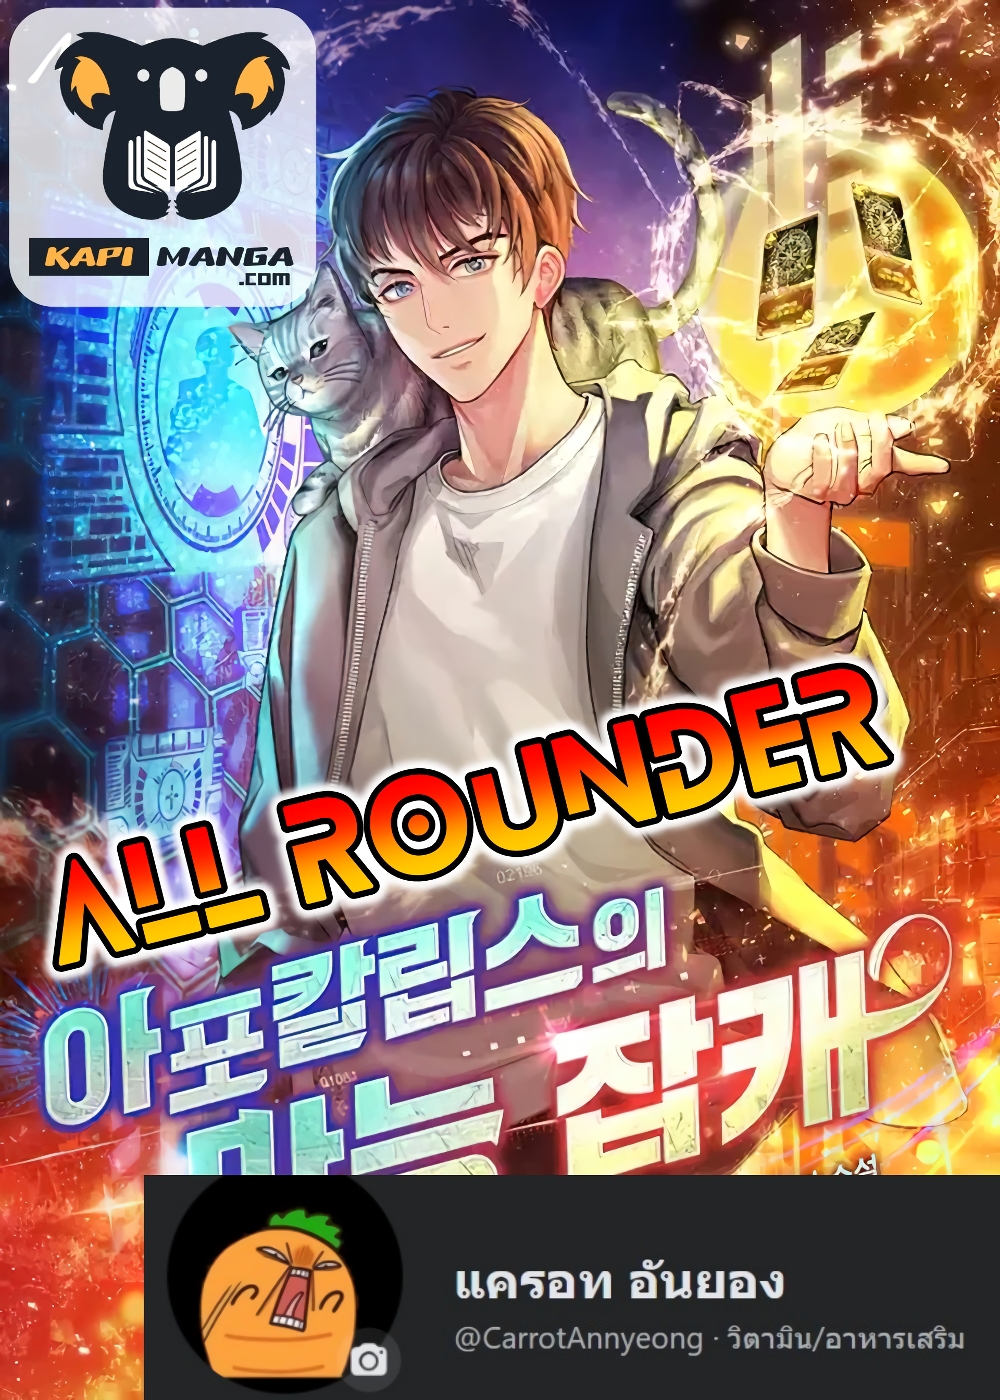 All Rounder5 (1)